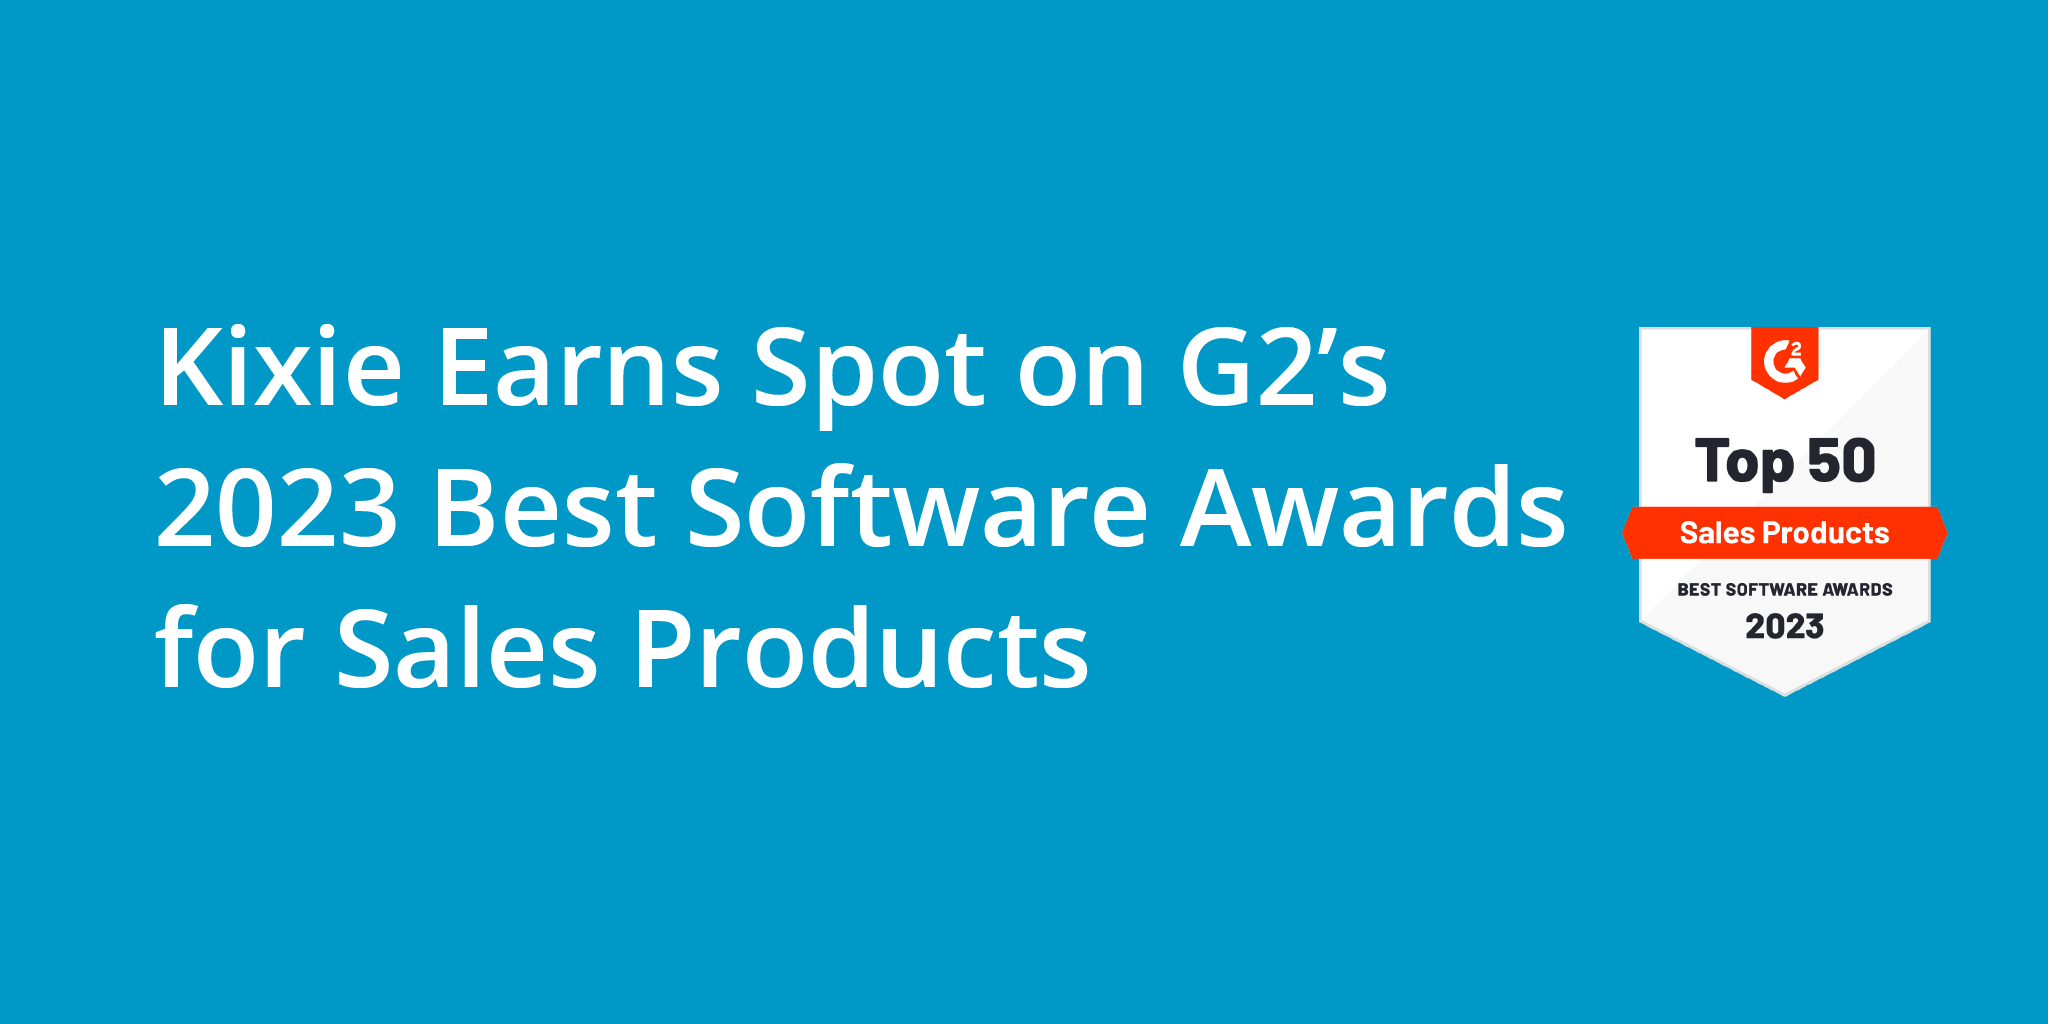 Kixie Earns Spot on G2’s 2023 Best Software Awards for Sales Products | Telephones for business